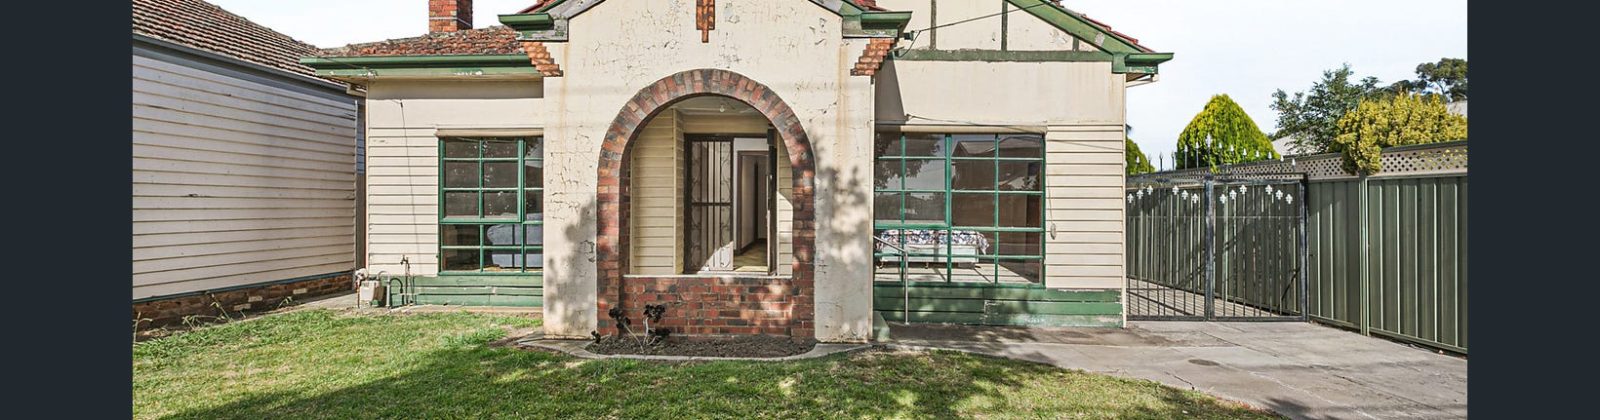 Northcote bid at auction buyers agent wendy chamberlain melbourne